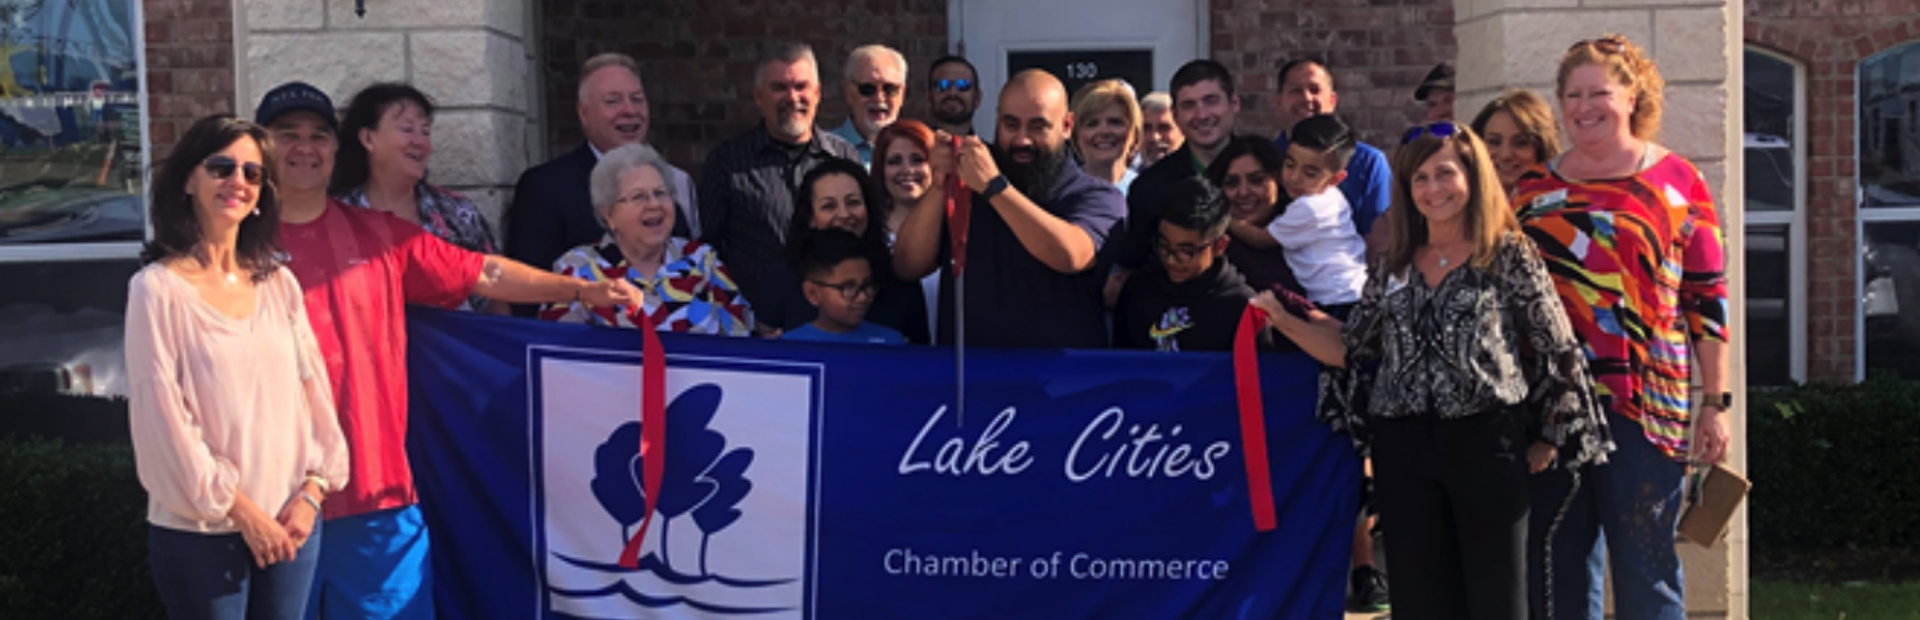 Lake Cities Chamber of Commerce | Bearded. Barber Ribbon Cutting | June 2, 2020